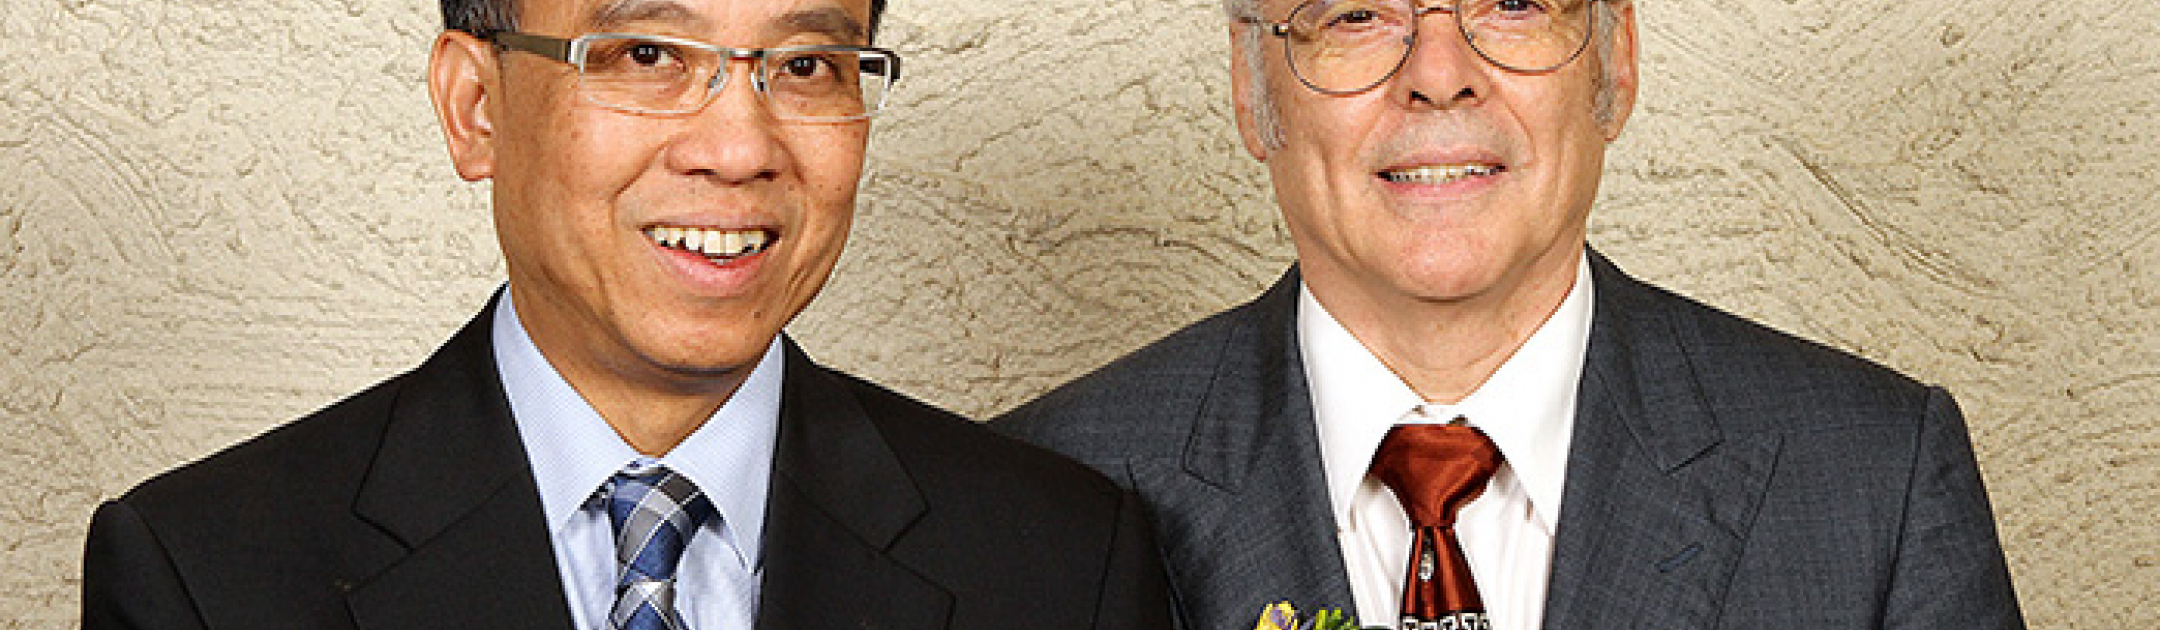 Drs. Ting-Yim Lee and Frank Prato